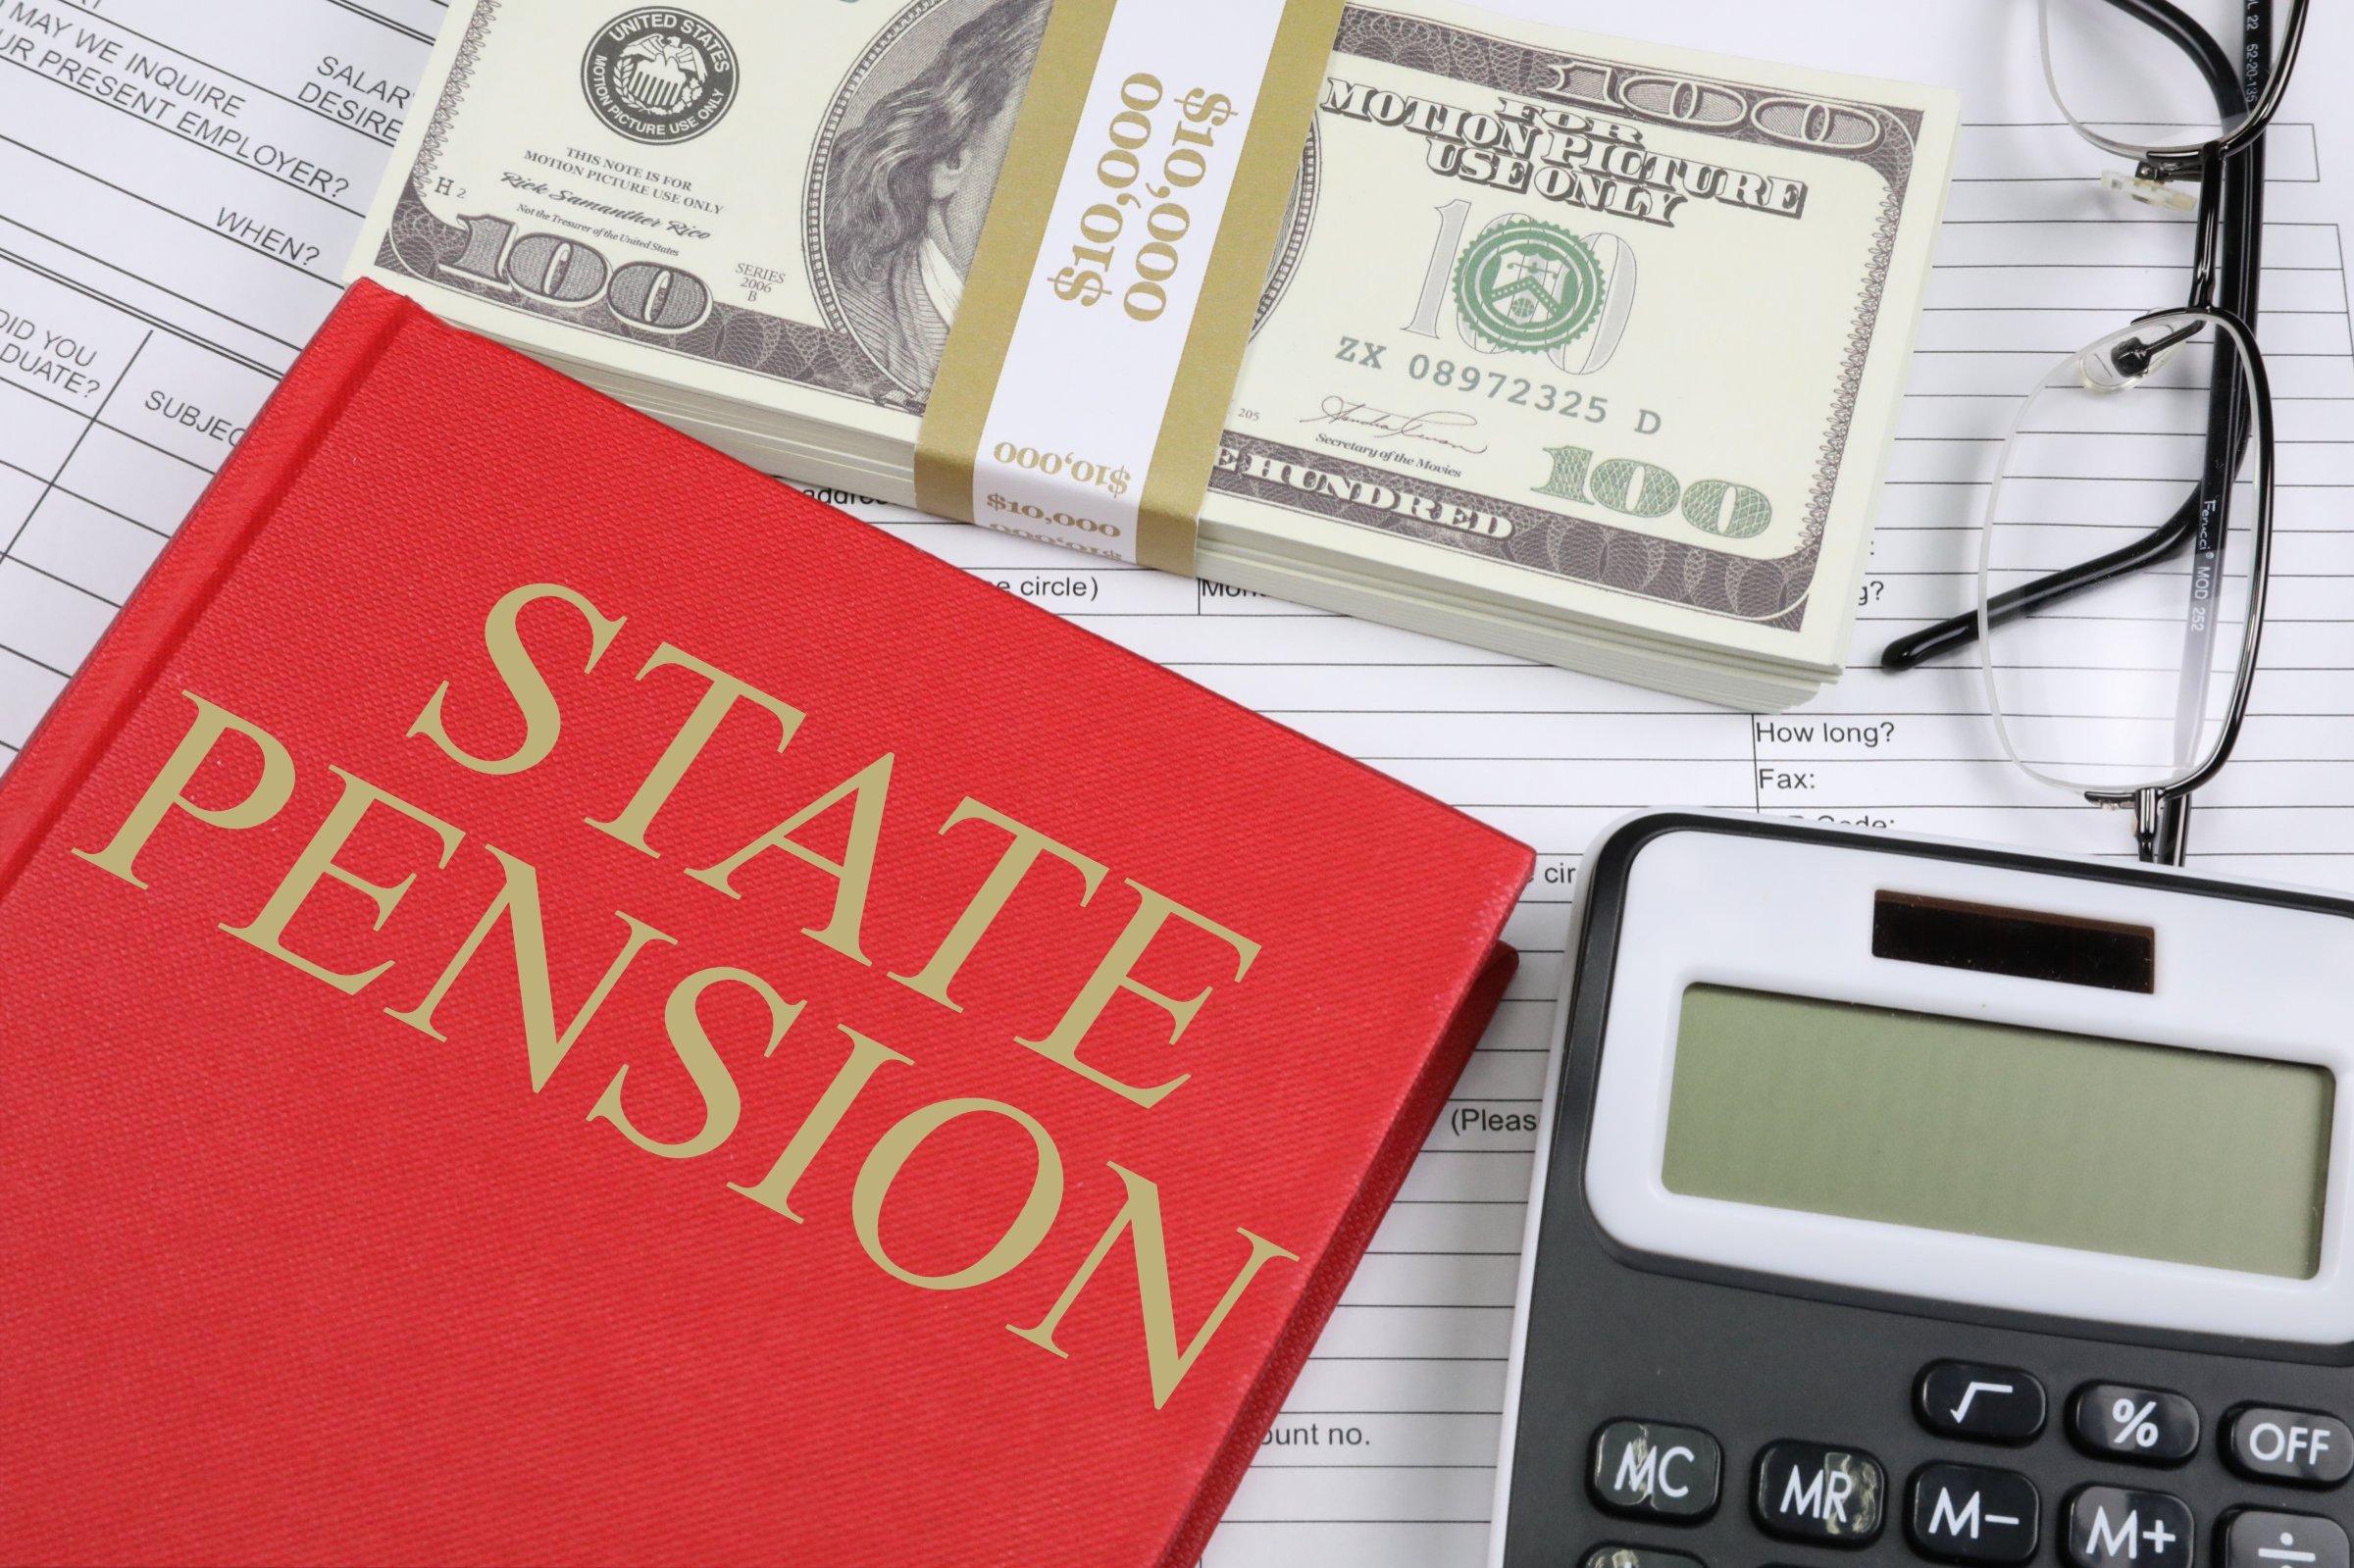 state pension